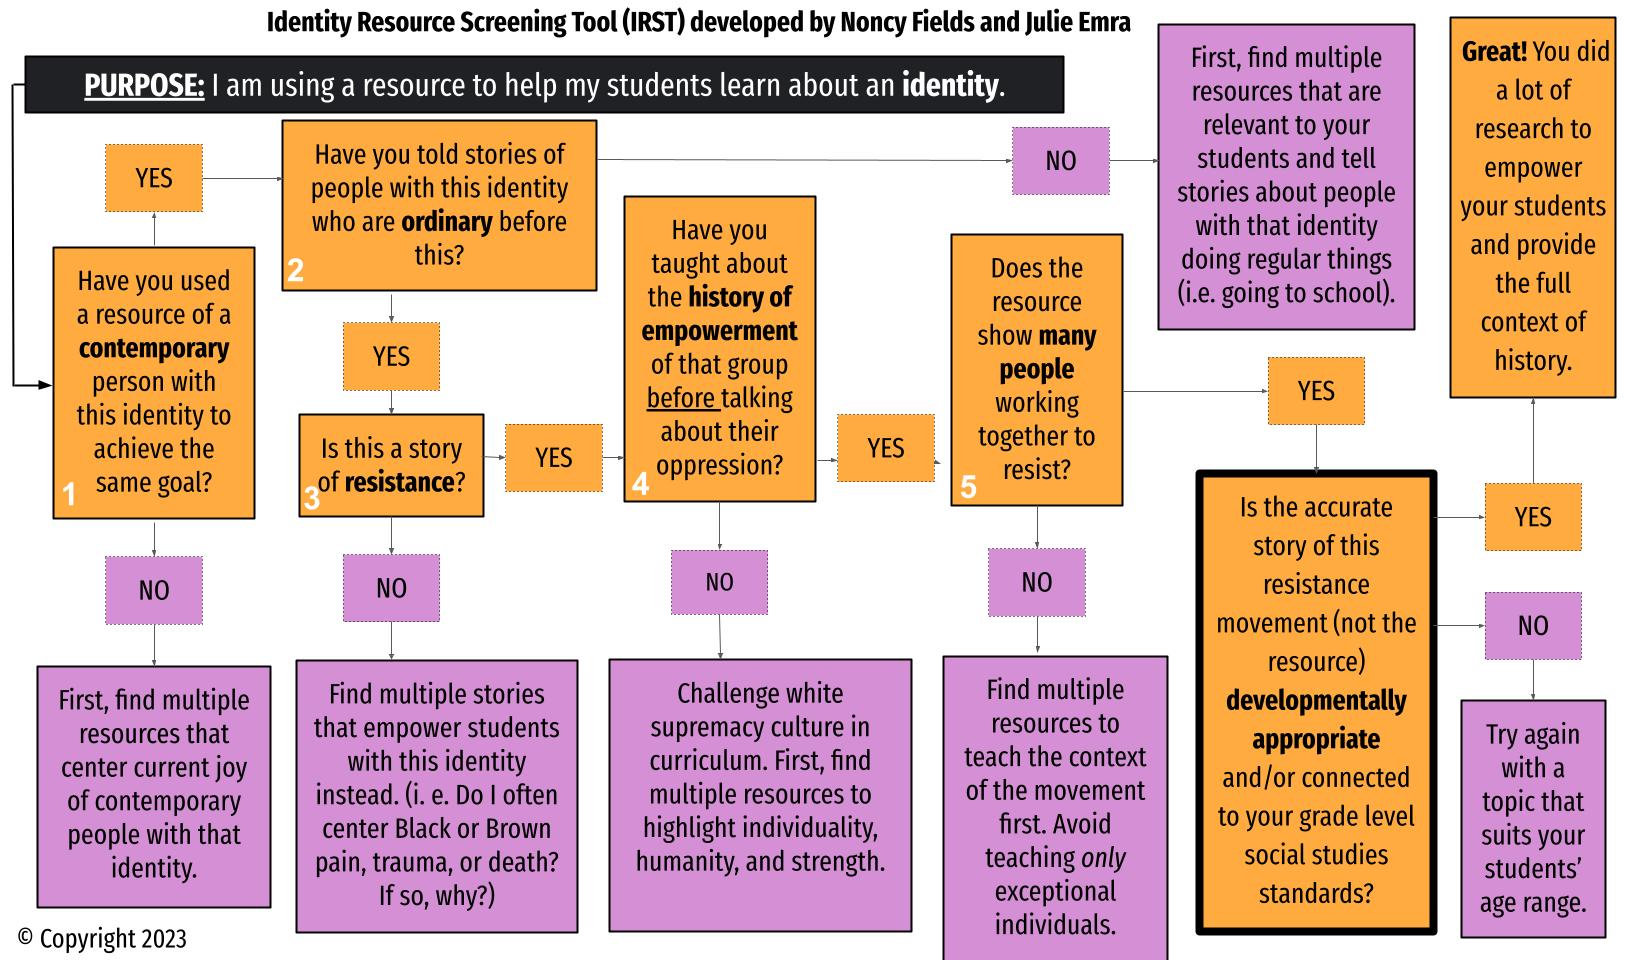 The Identity Resource Screening Tool is a visual flowchart developed to help teachers screen the resources they use to teach about marginalized identities